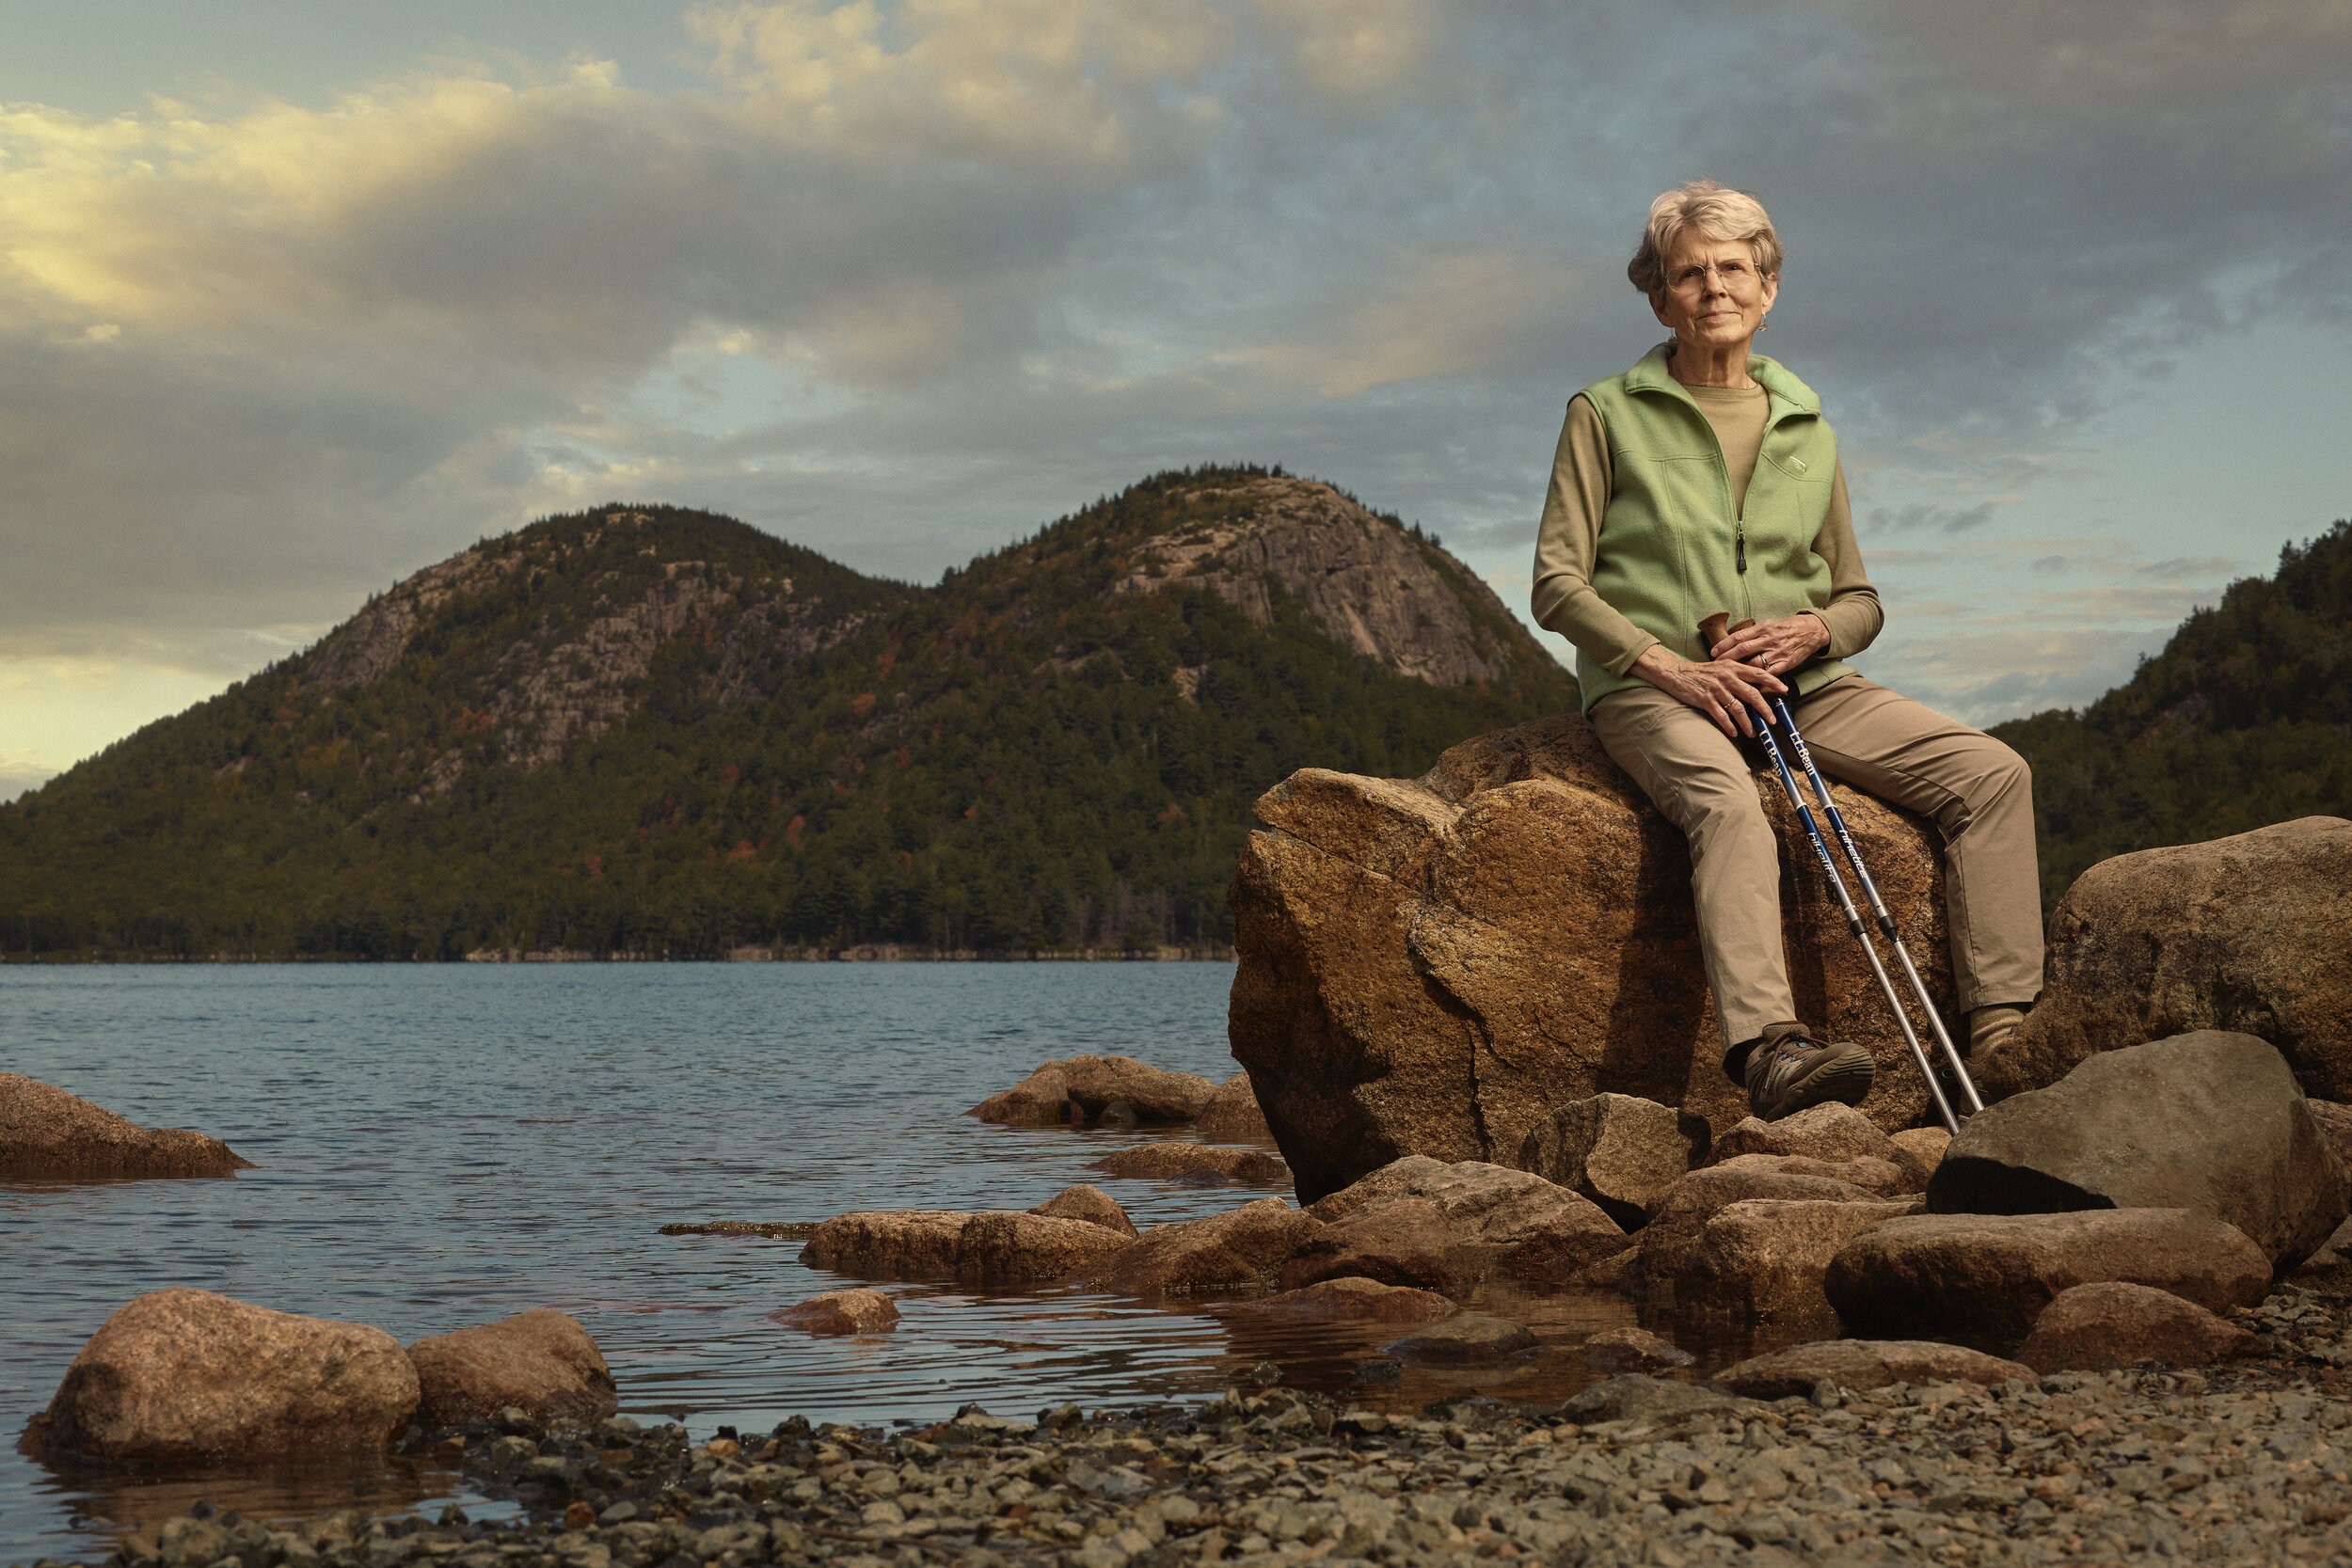  Ann Bradford, 82, has been hiking to the summit of each of Acadia National Park’s 28 peaks every summer since she was 75. Her love for this park and Mount Desert Island is profound and inspirational. 